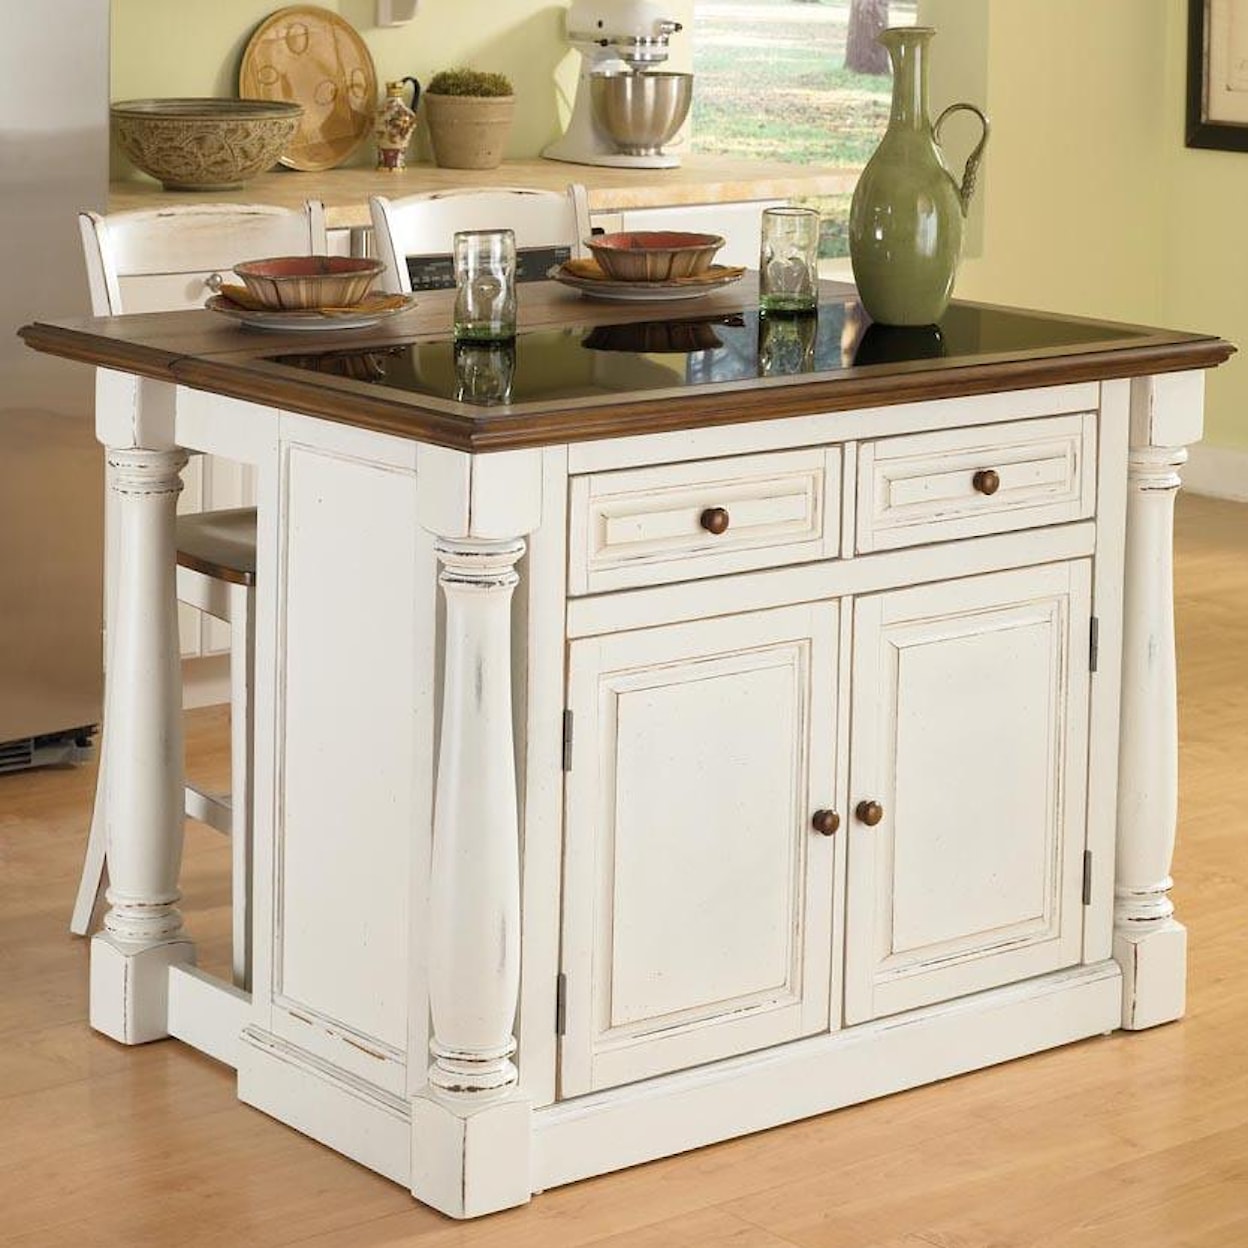 homestyles Monarch Kitchen Island with Stools